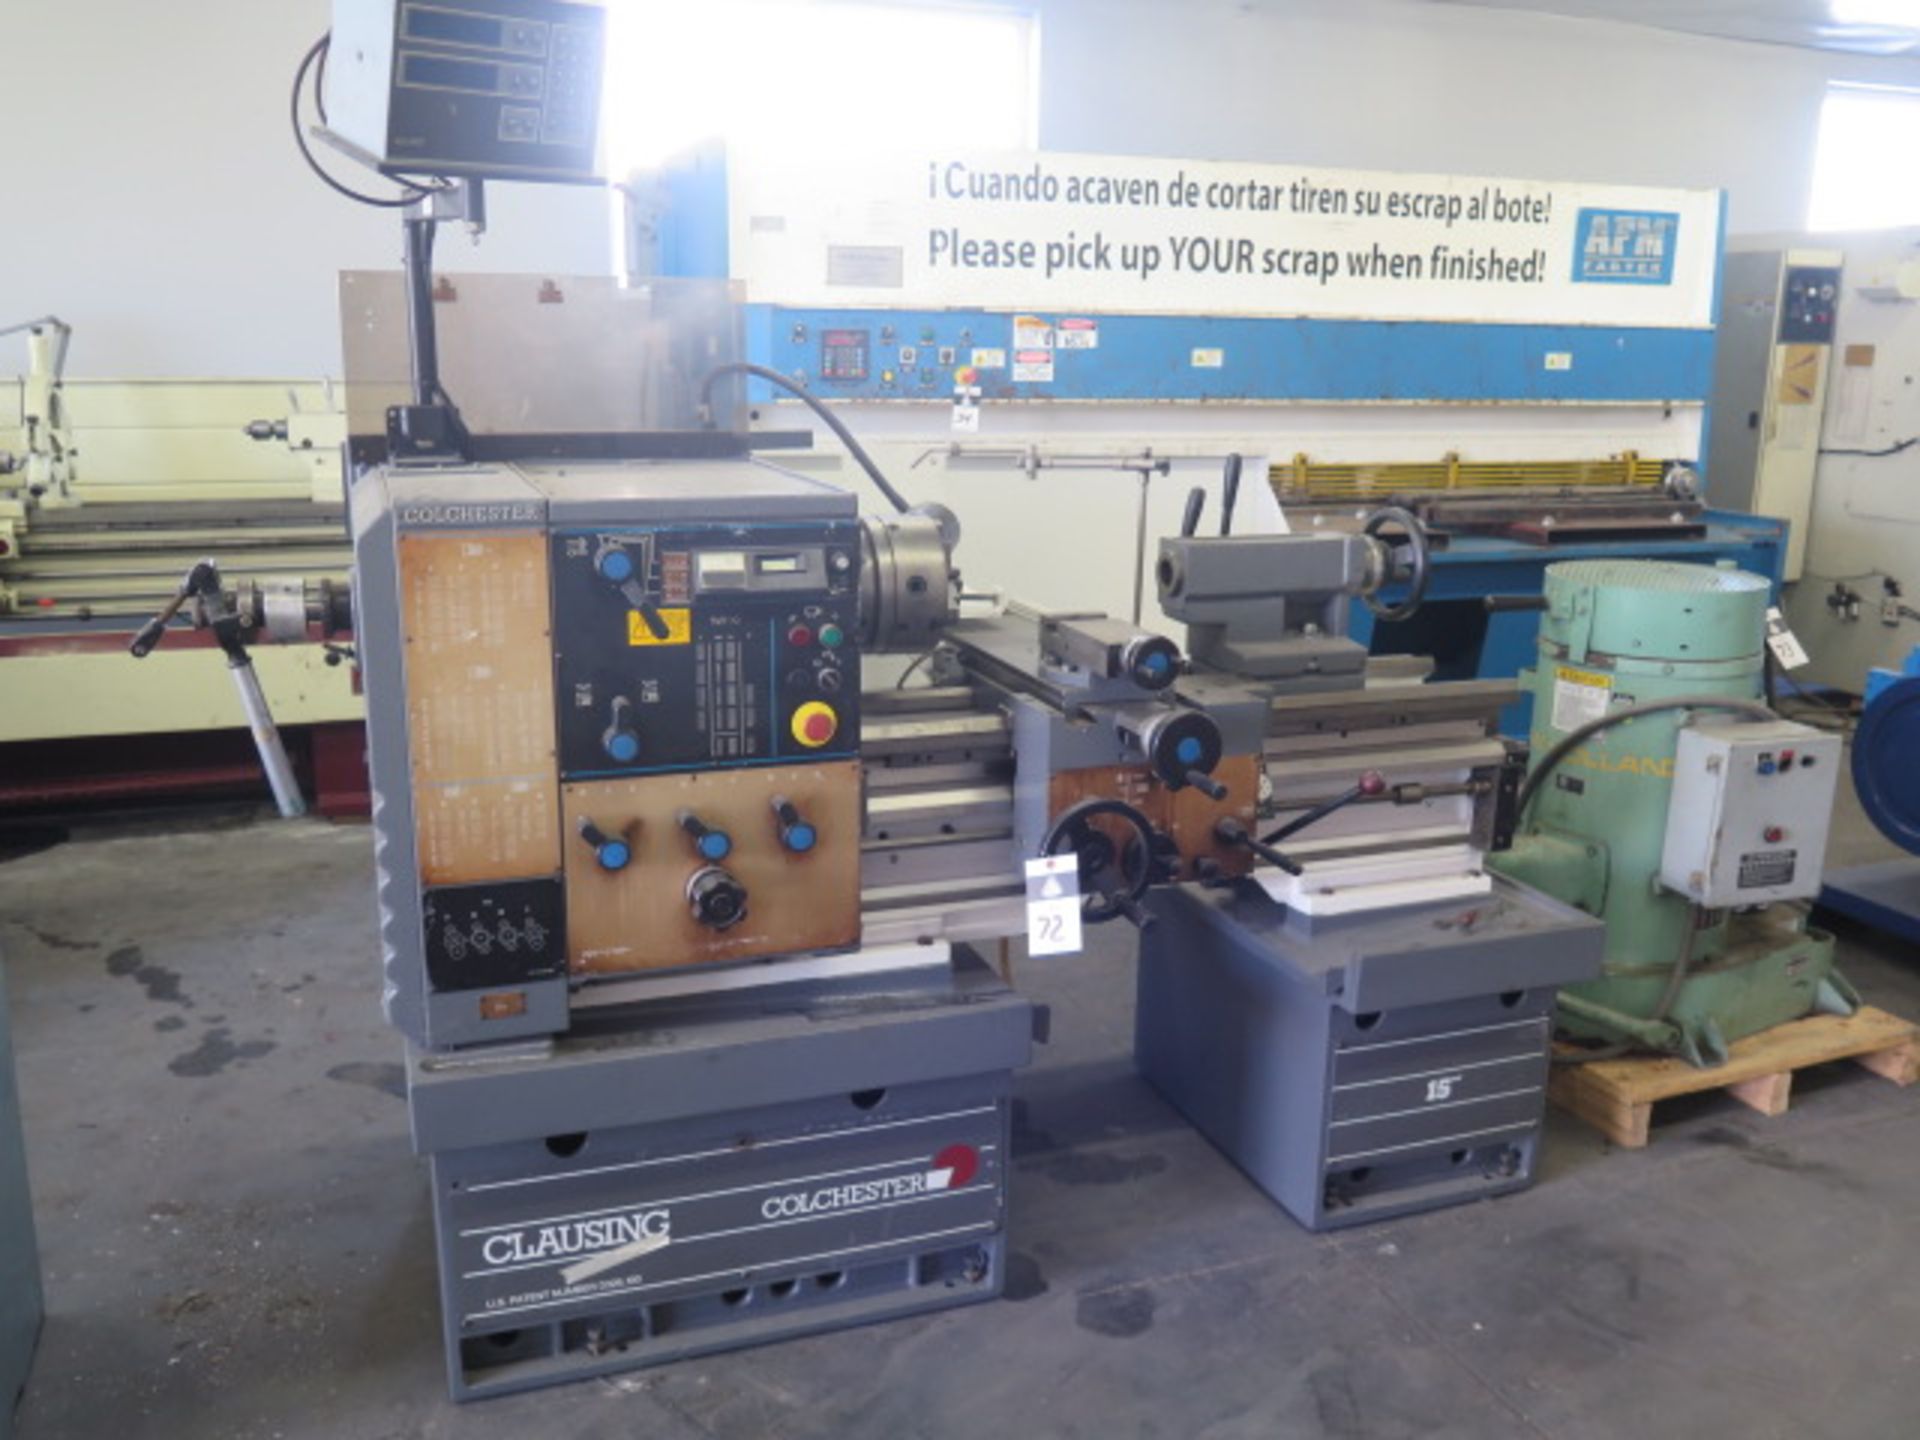 Clausing Colchester 15” x 24” Lathe s/n VT0656-791 w/ Acu-Rite Turn Mate DRO, 15-2500, SOLD AS IS.